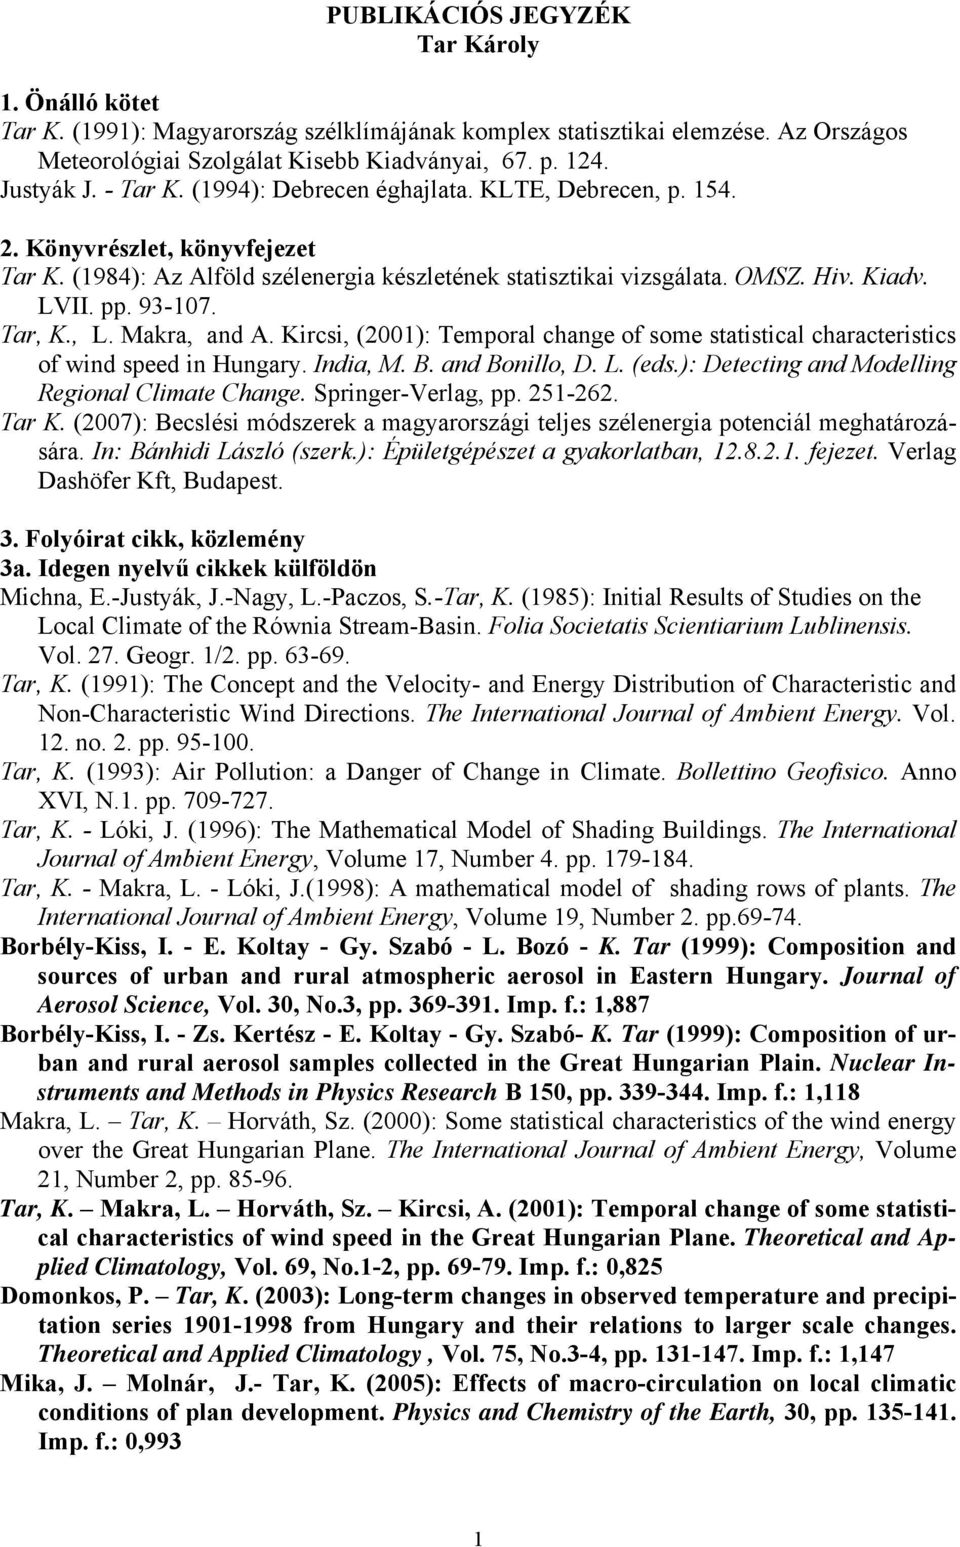 Tar, K., L. Makra, and A. Kircsi, (2001): Temporal change of some statistical characteristics of wind speed in Hungary. India, M. B. and Bonillo, D. L. (eds.